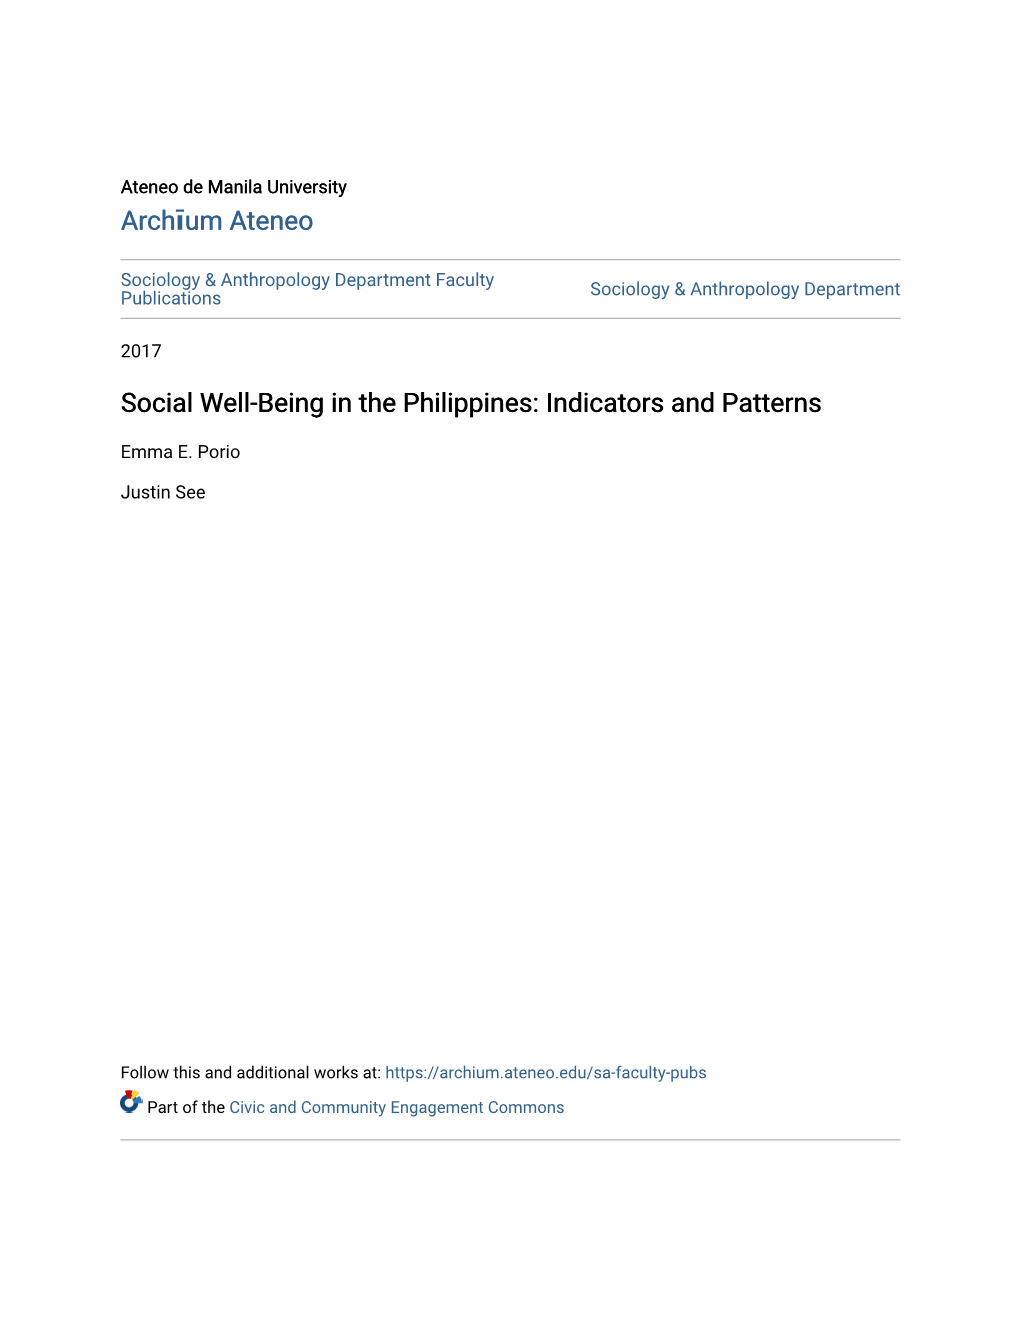 Social Well-Being in the Philippines: Indicators and Patterns